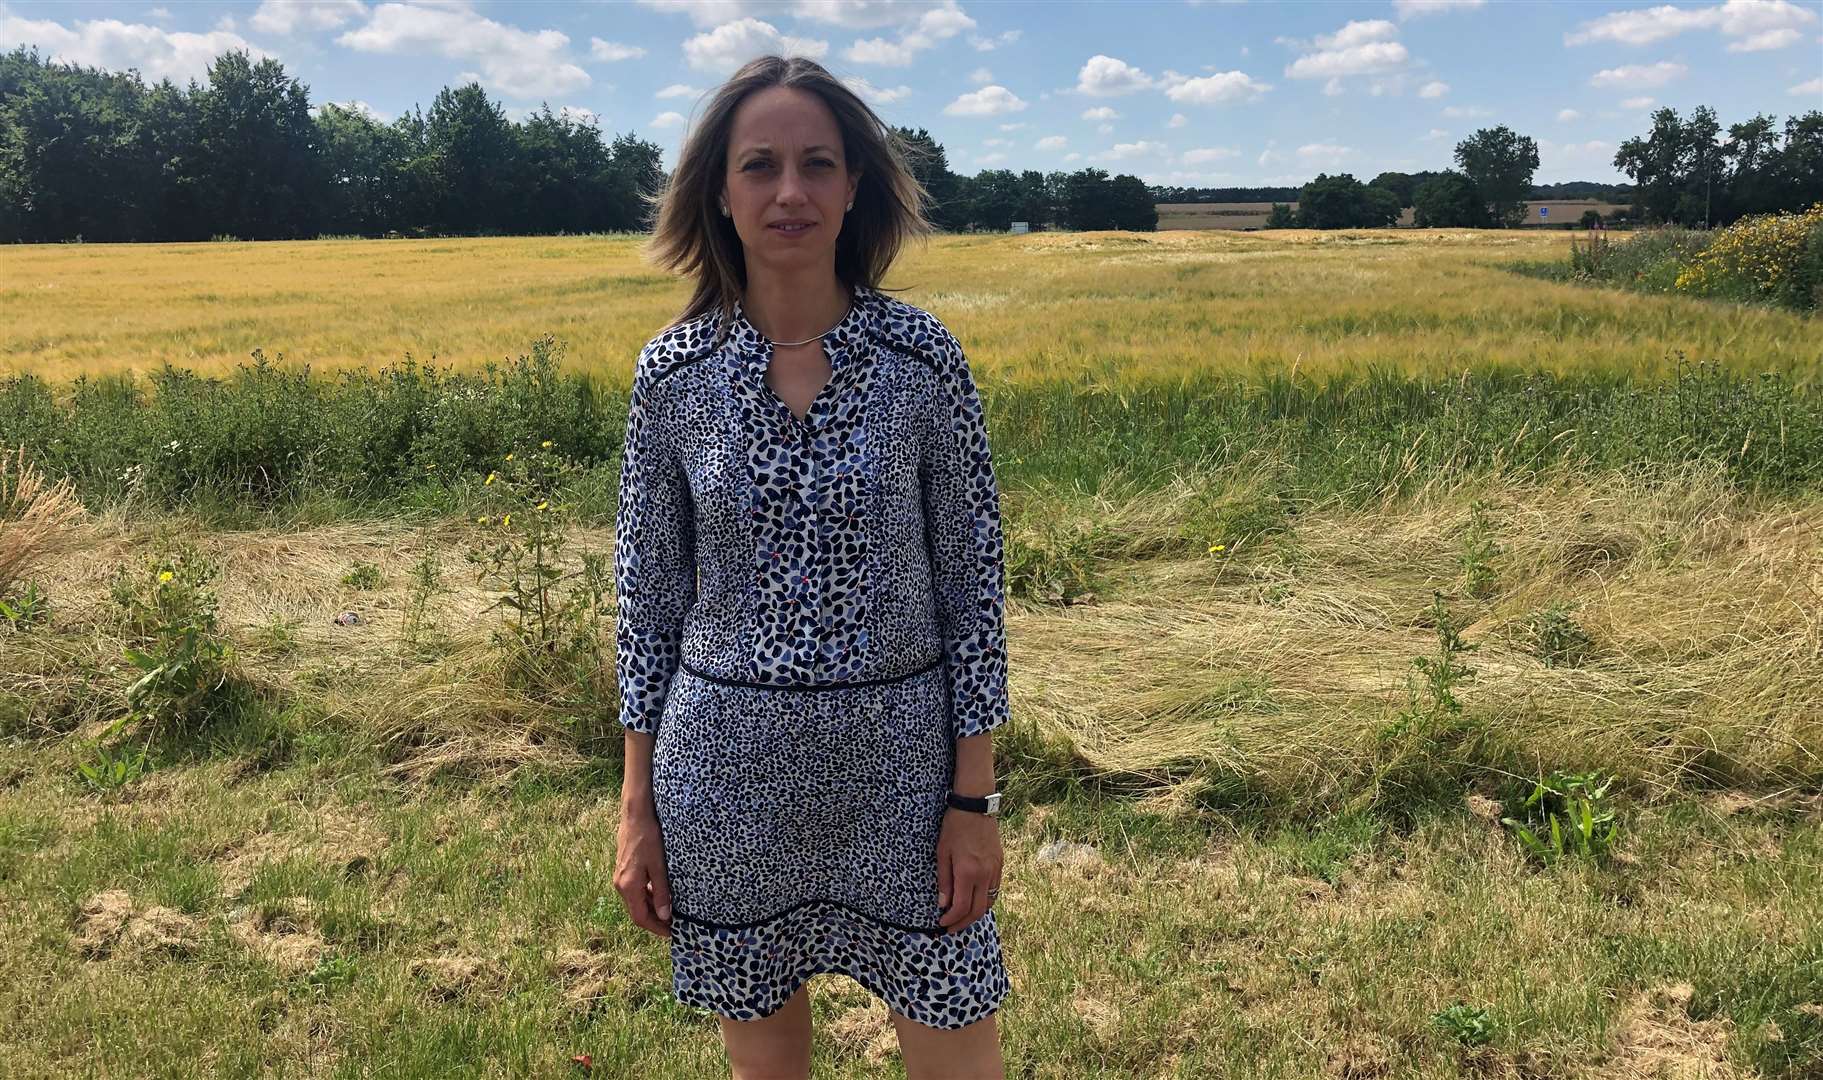 Helen Whately still has reservations about the garden villages